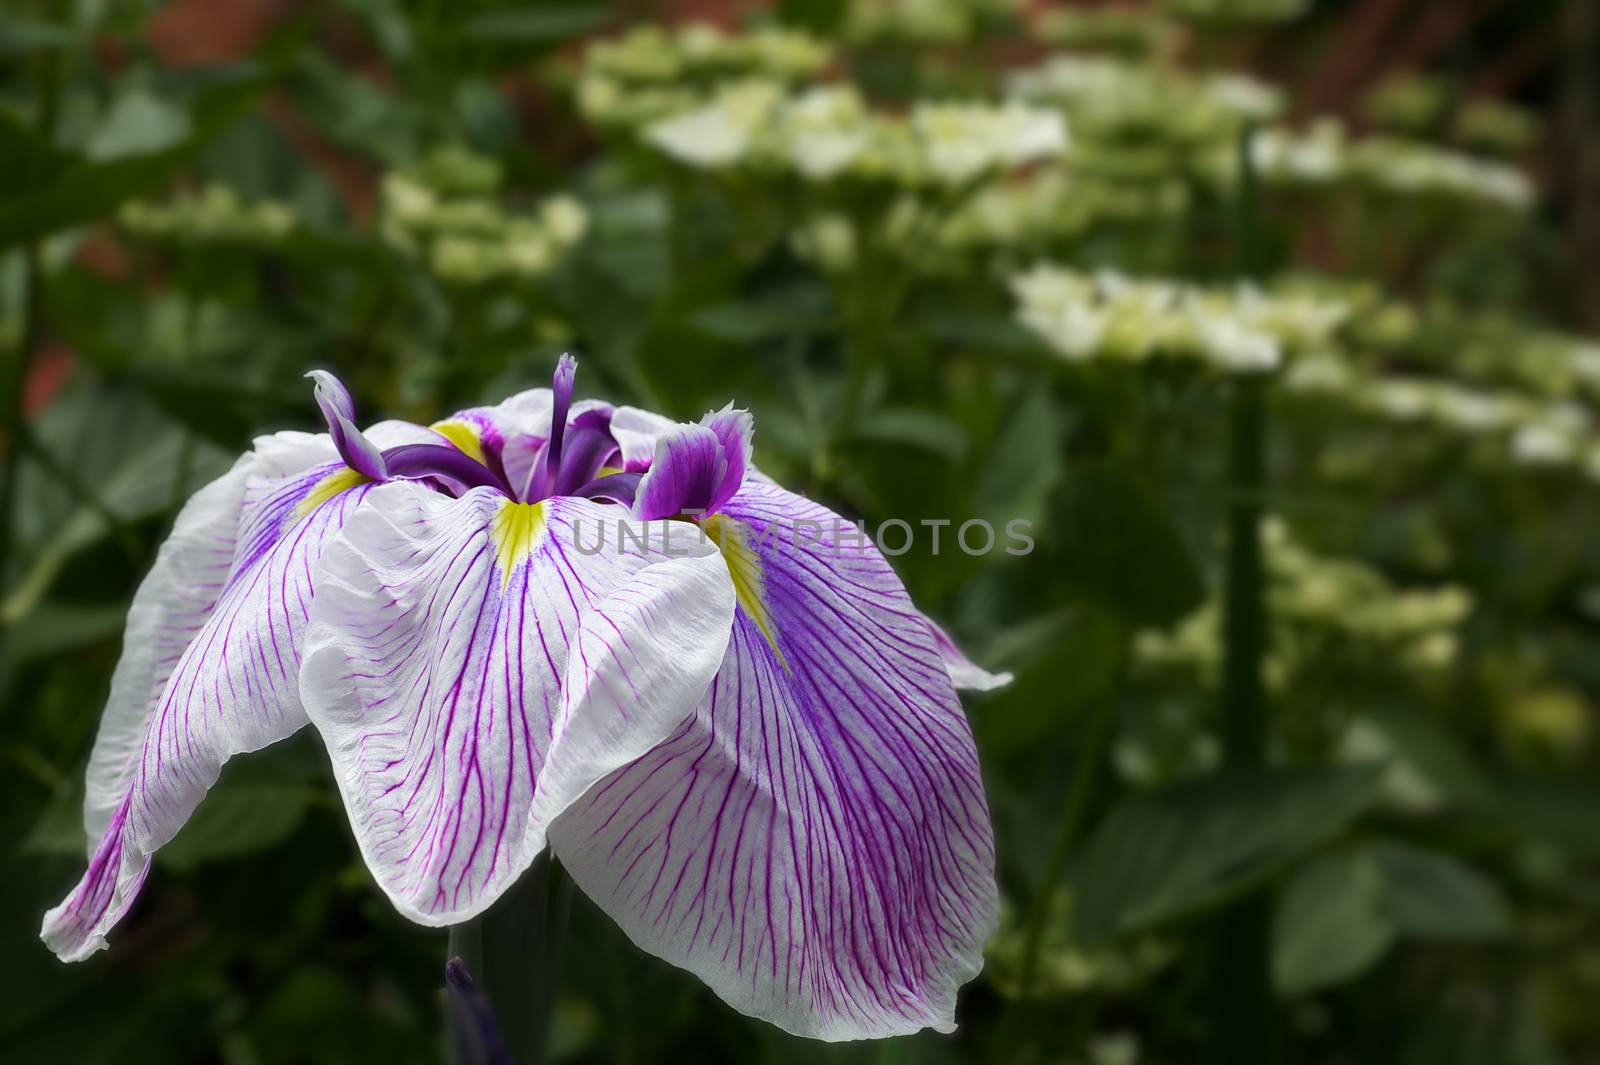 Purple and White Iris with a blurred green background